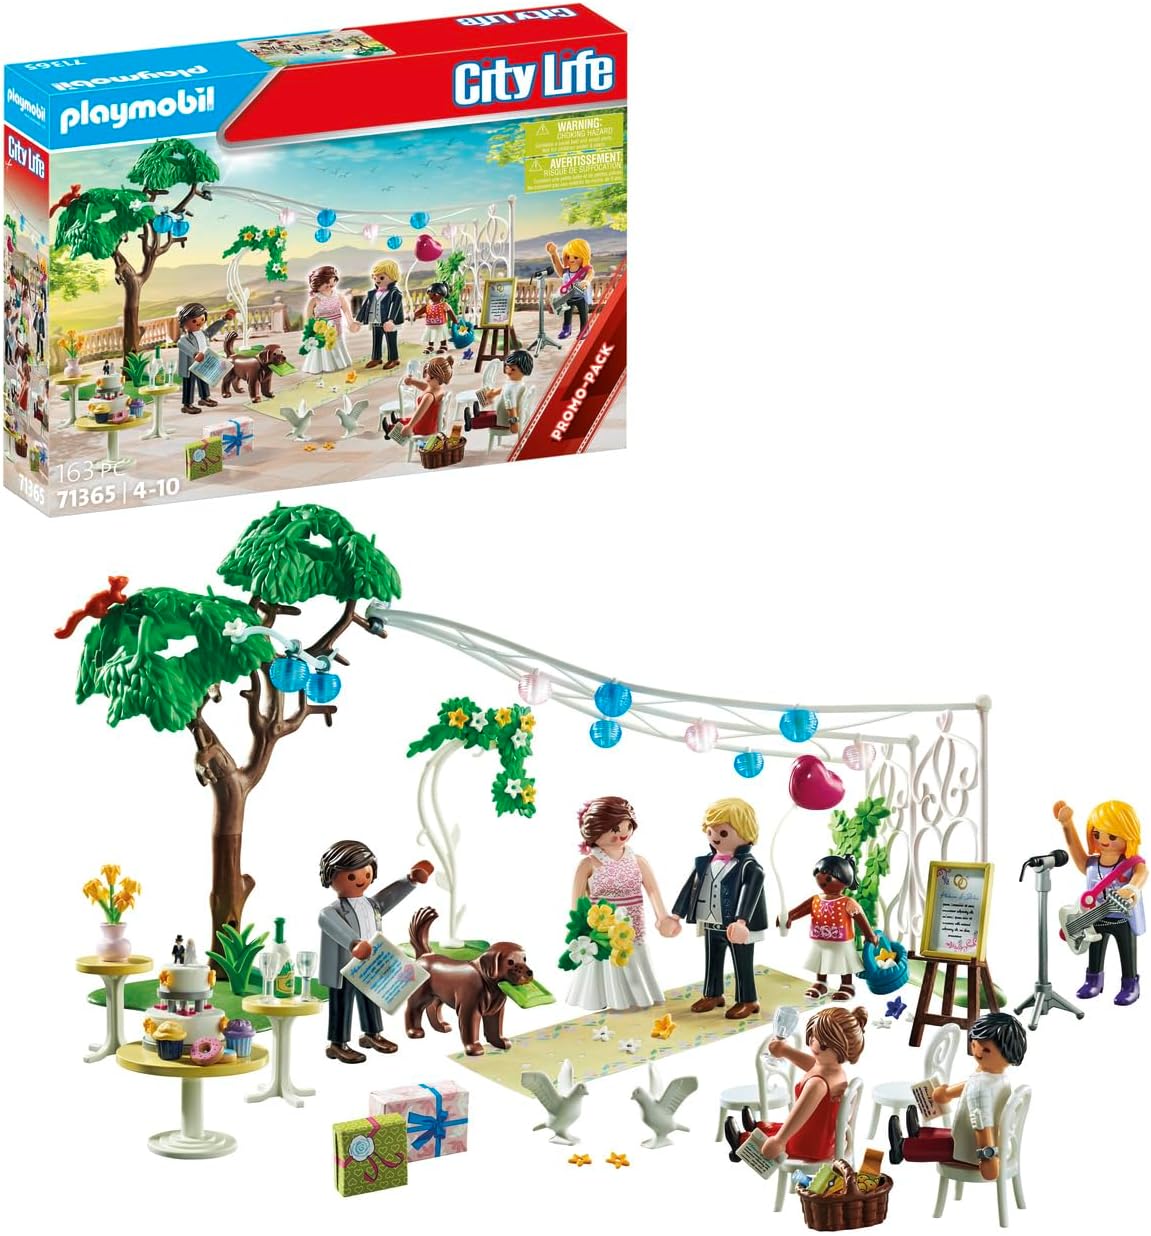 PLAYMOBIL City Life 71365 Promo Pack Wedding Party, Dreamlike Romantic Wedding Ceremony to Replay, with Wedding Decoration and Multiple Animals, Toy for Children from 4 Years